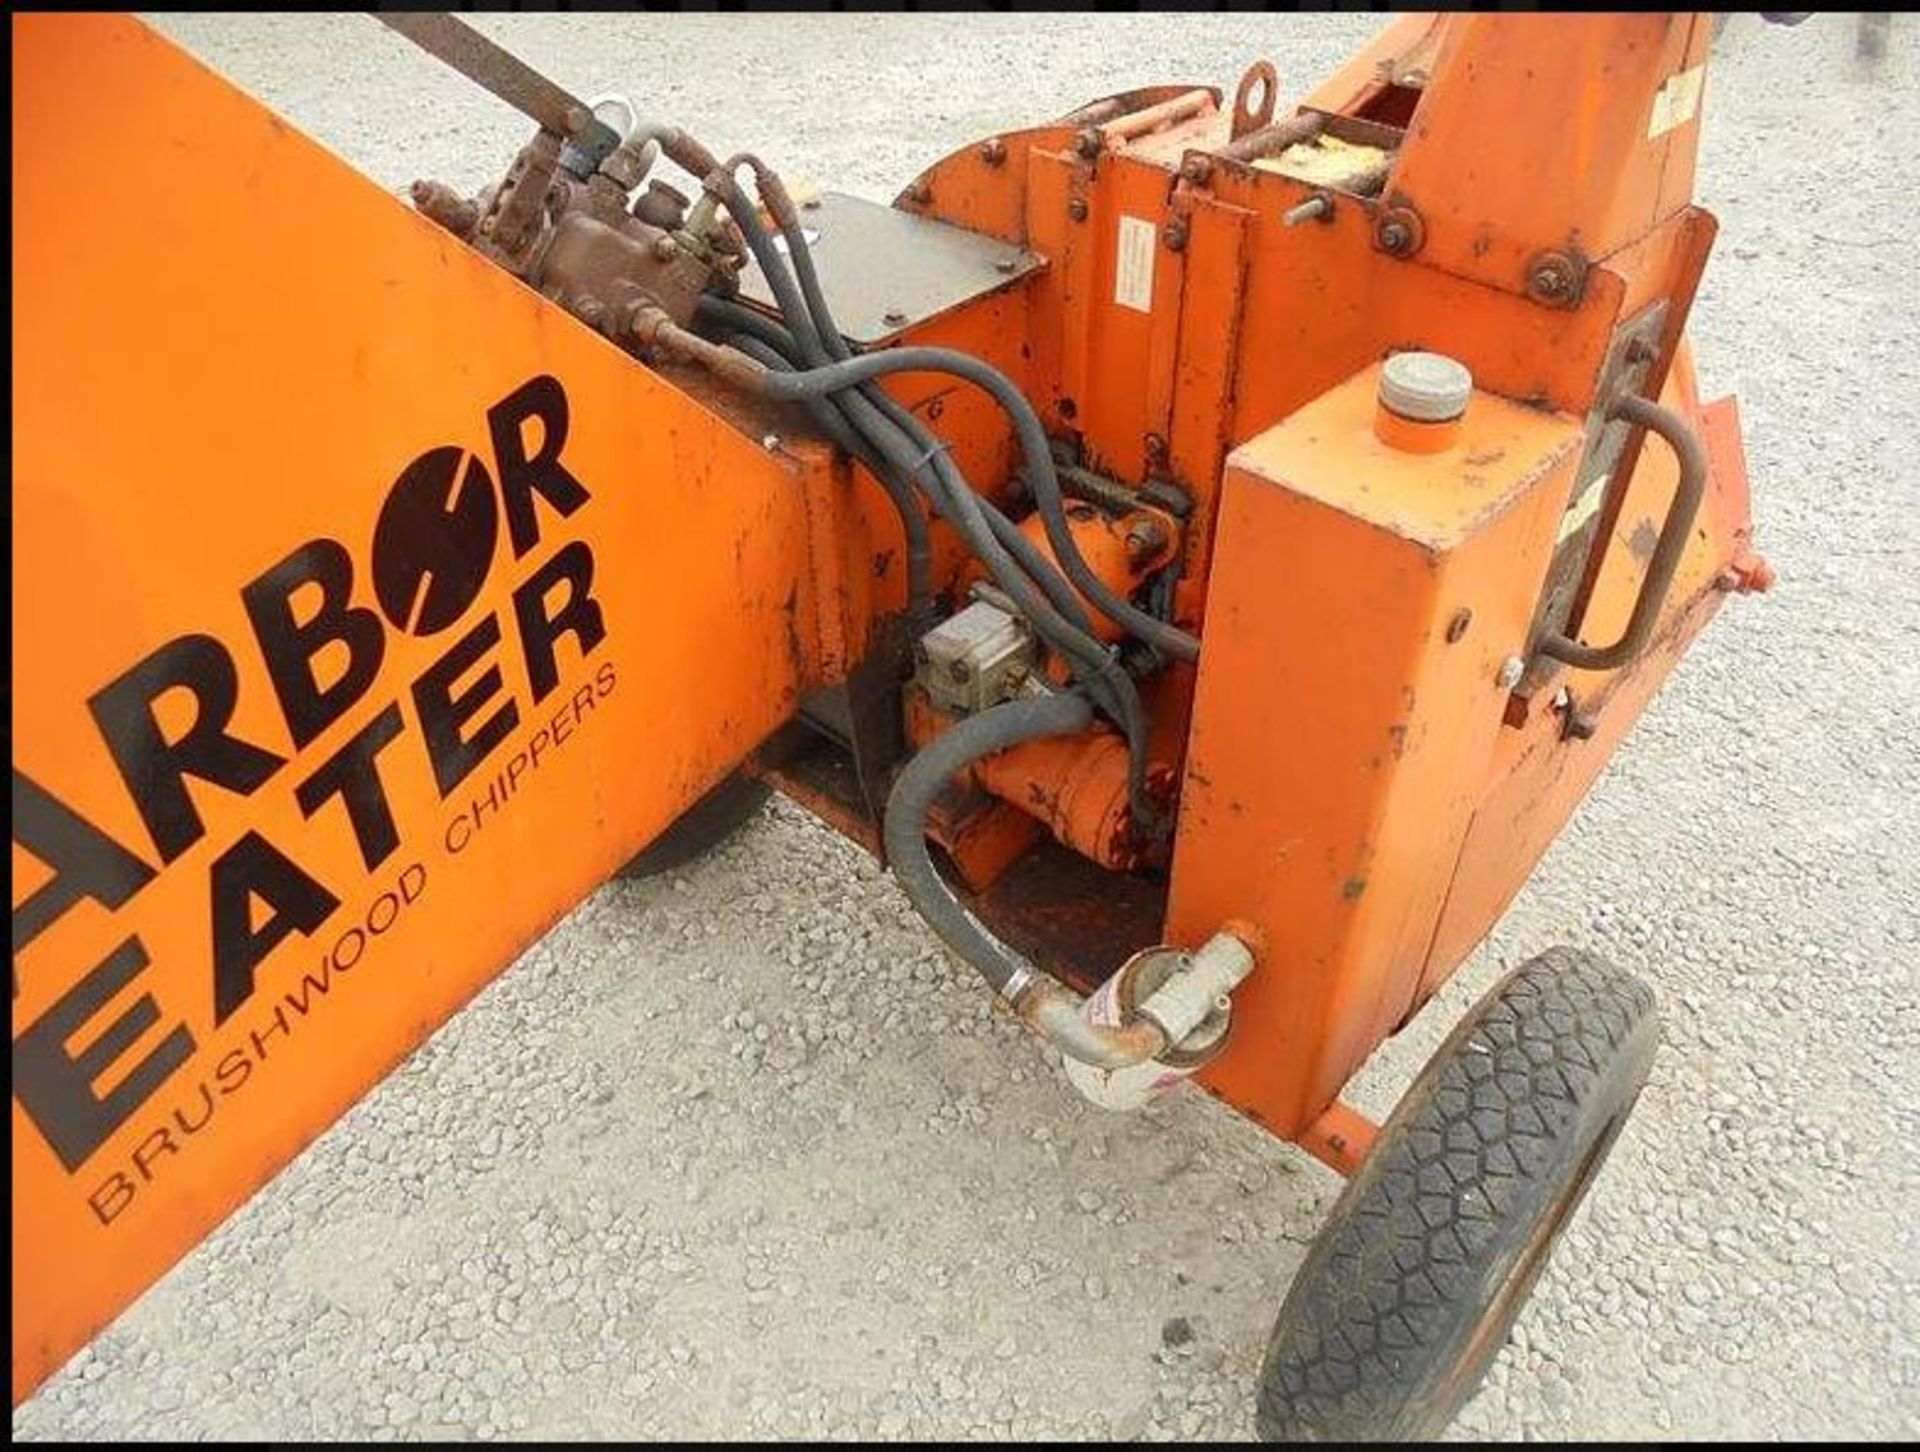 Arbor Eater 140 T PTO Wood Chipper - Image 10 of 11